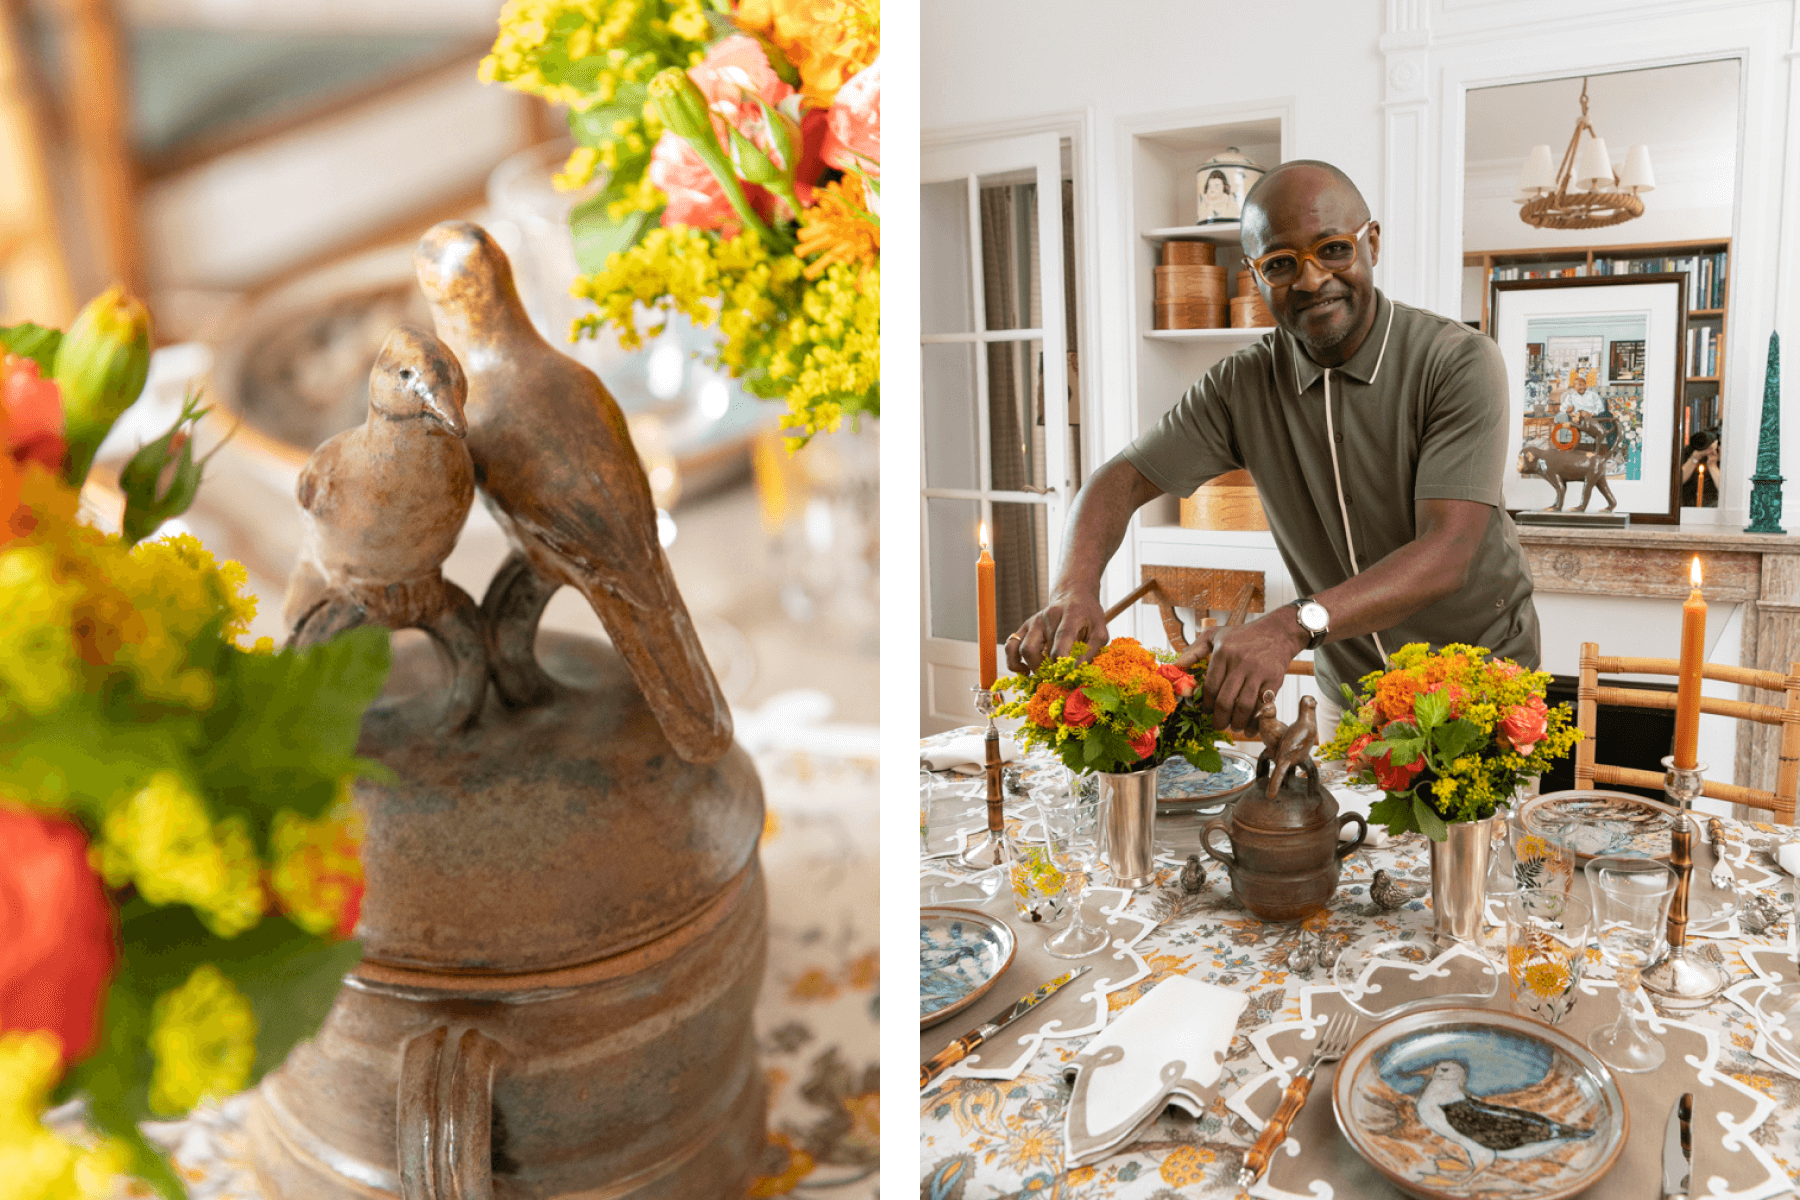 Left: Ceramic bird sculpture on a dinner table. Right: Man, Eric Goujou, adds finishing touches to a fall-themed dinner table setting. 